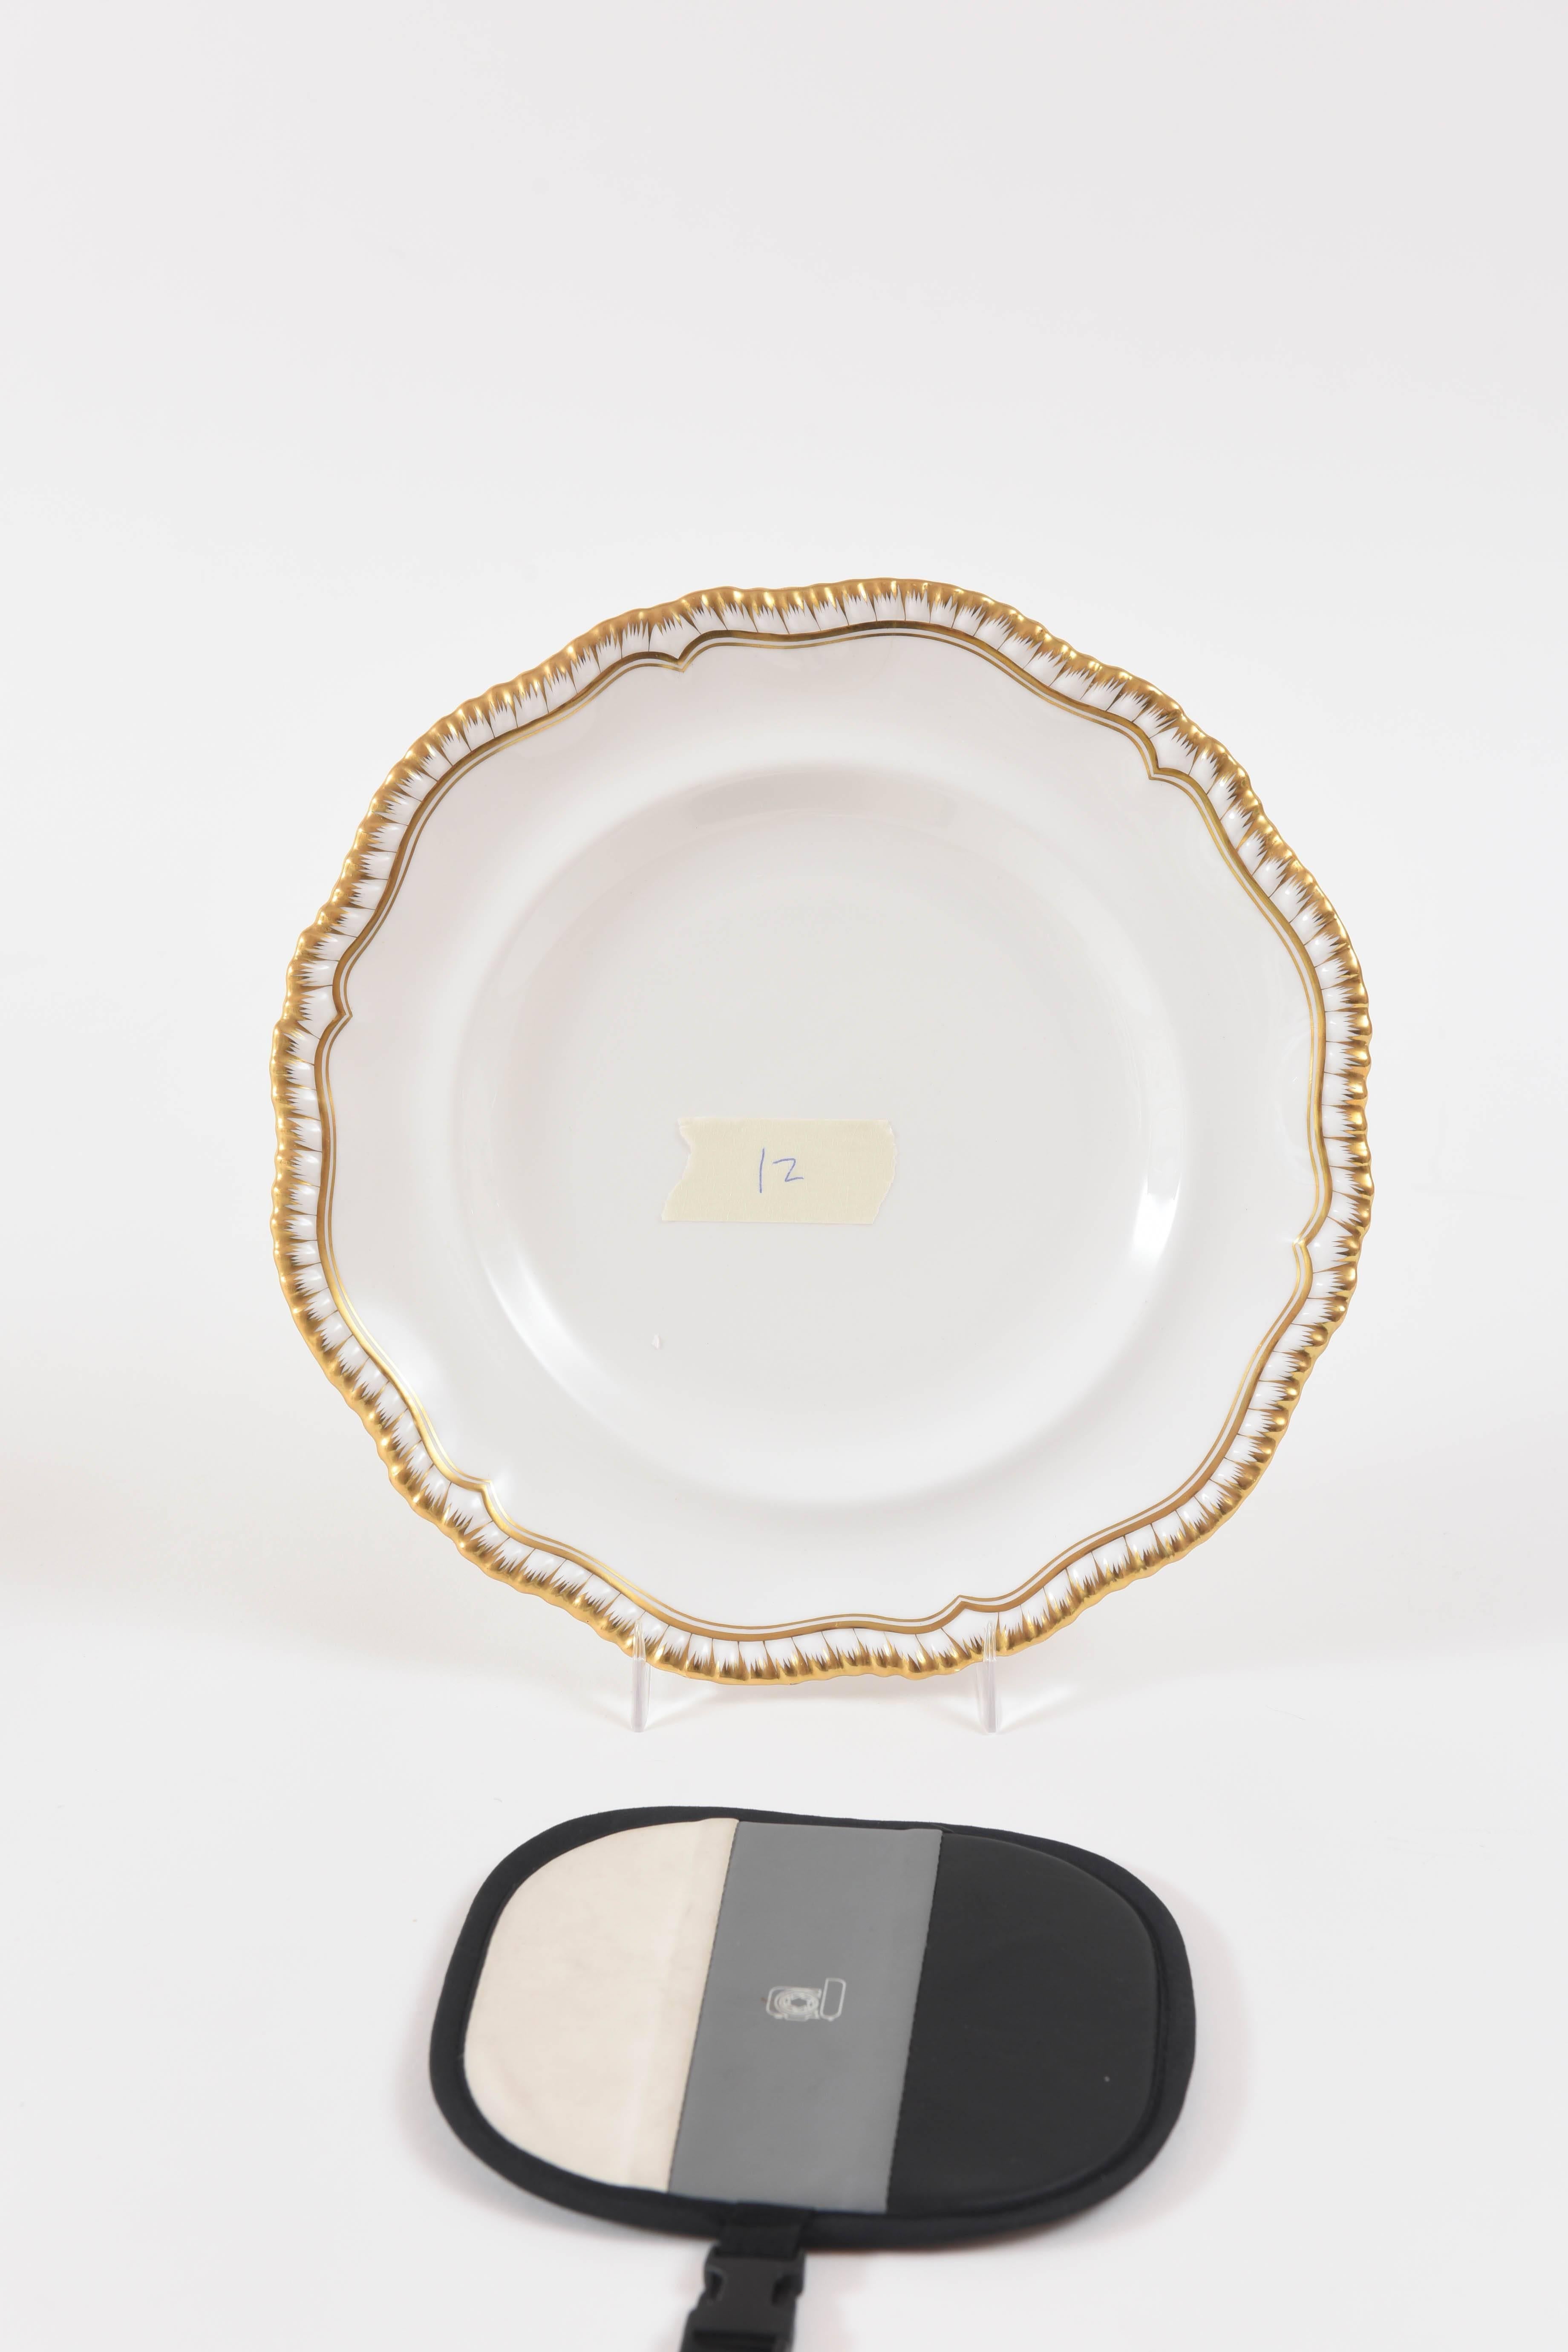 A Classic and elegant set of 12 dinner plates featuring a very pretty shape and hand trimmed gold. Classic and crisp, these will mix and match nicely with all your Fine porcelains. Lovely and very nice antique condition.